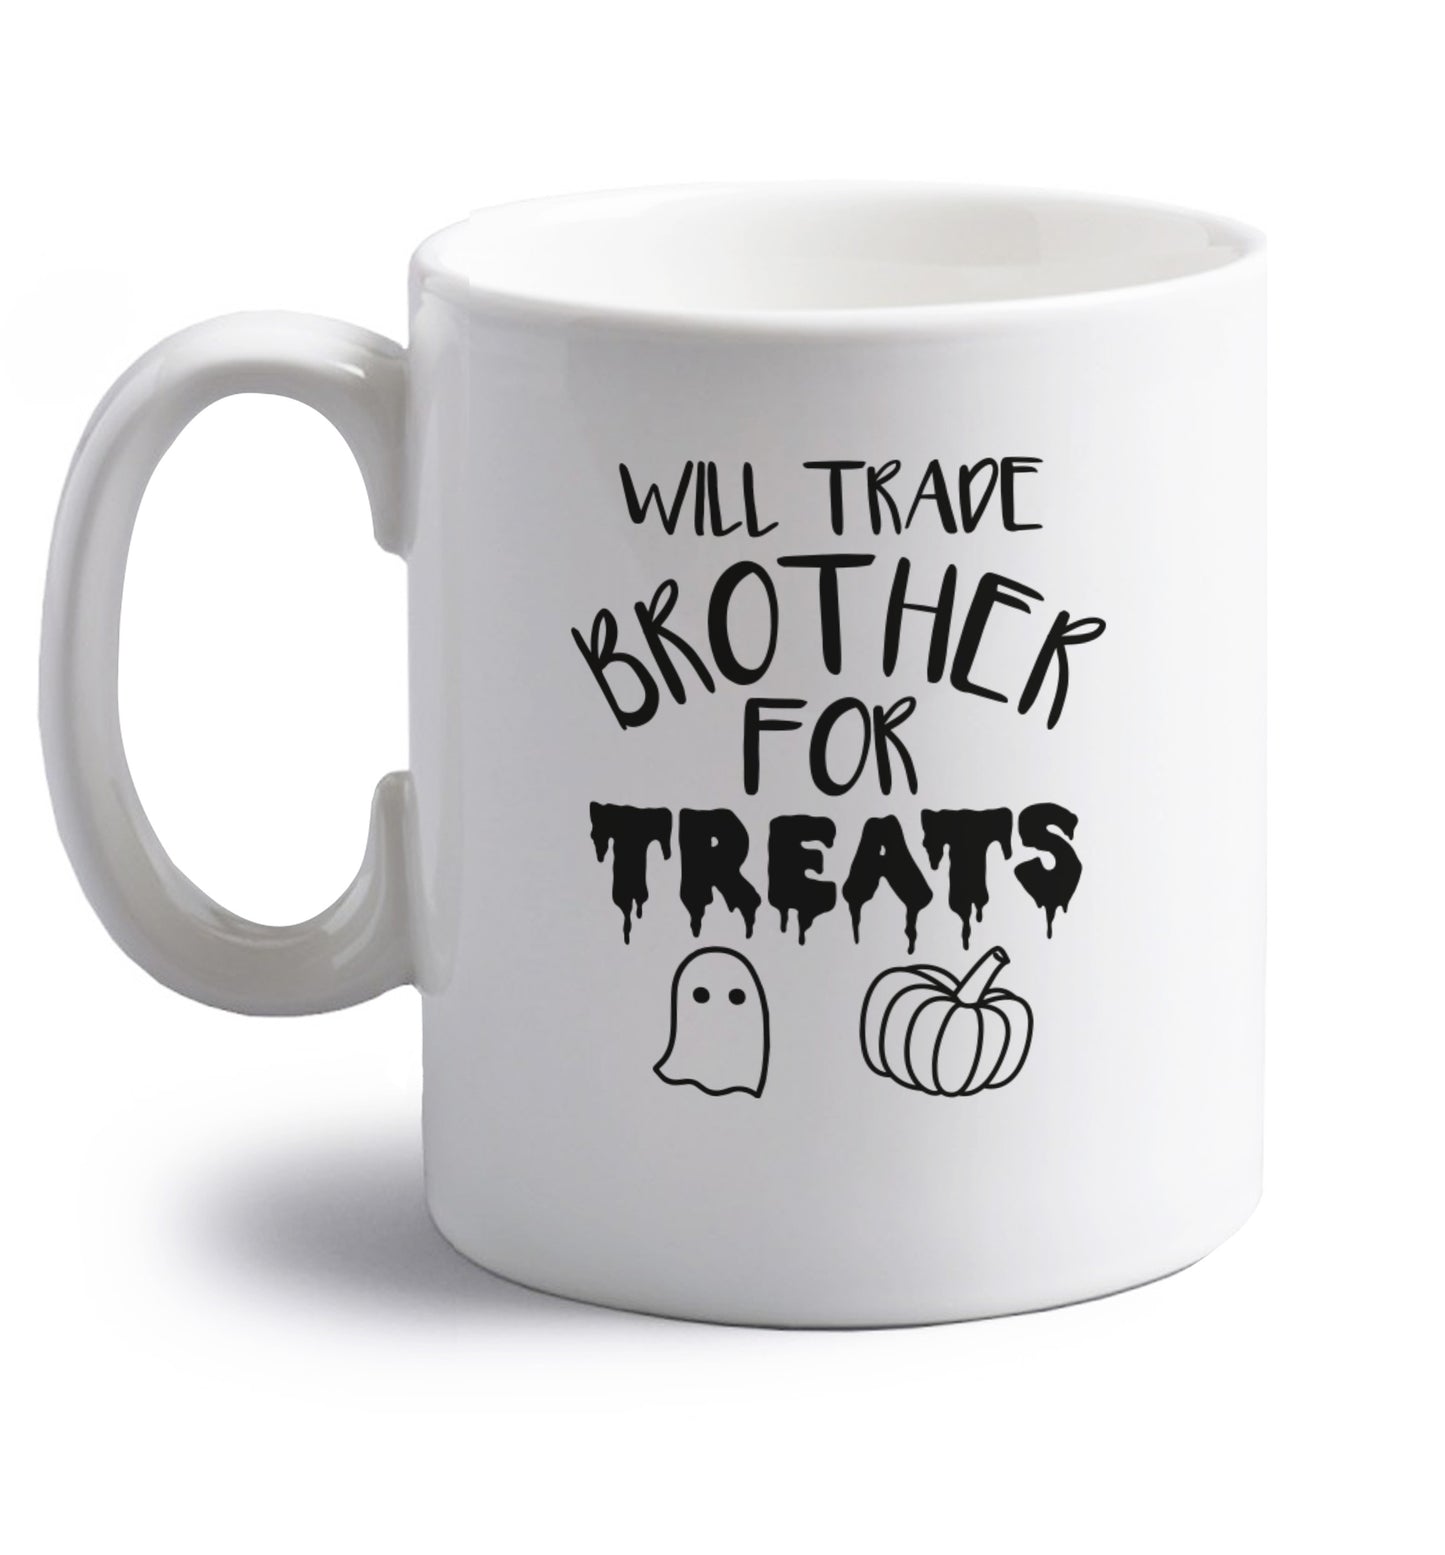 Will trade brother for treats right handed white ceramic mug 